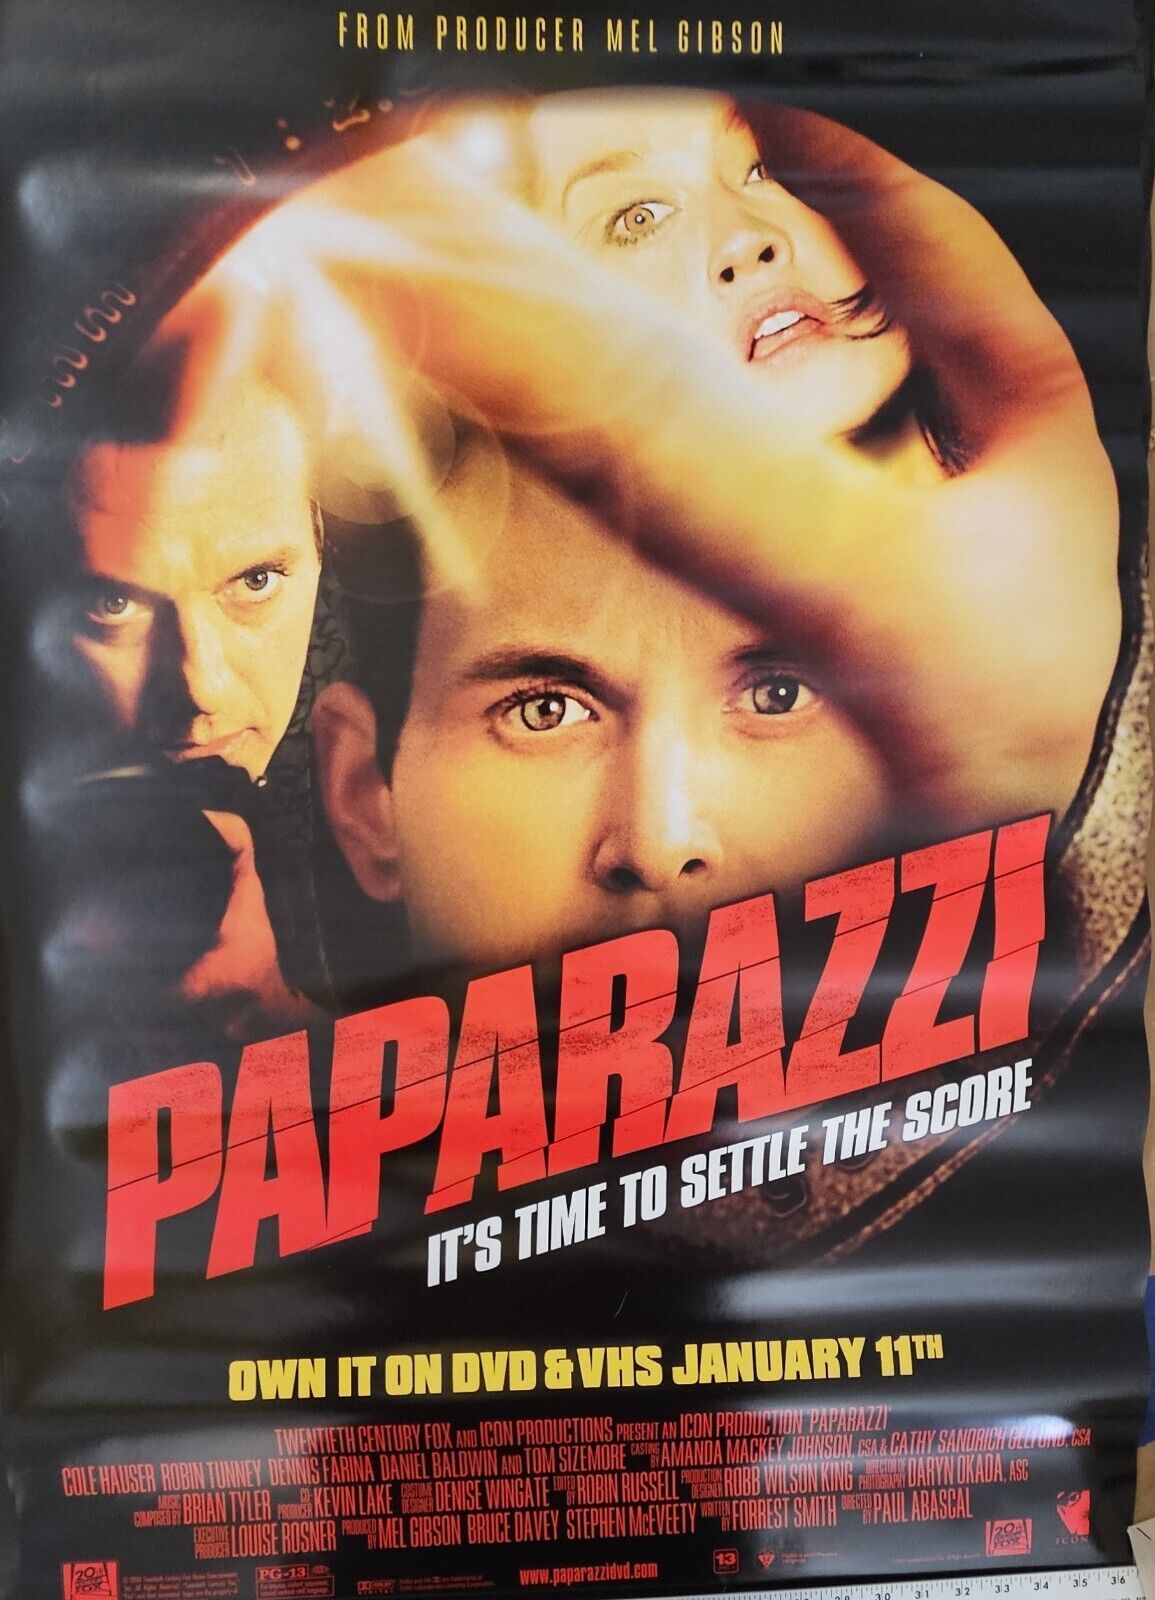 Produced by Mel Gibson . Cole Houser Stars in PAPARAZZI   27 X 40  DVD poster